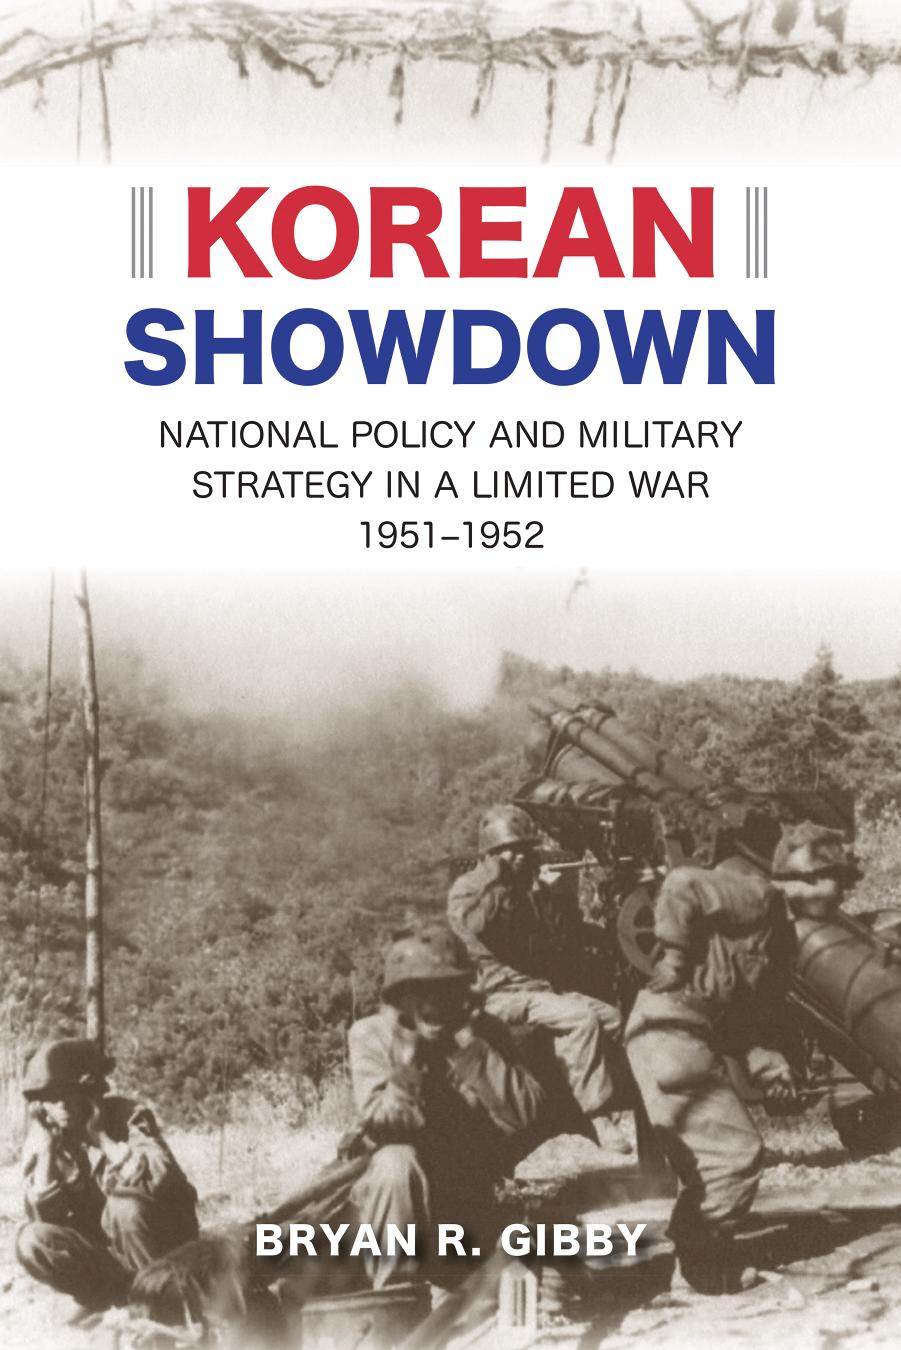 Korean Showdown : National Policy and Military Strategy in a Limited War, 1951-1952 by Bryan R. Gibby